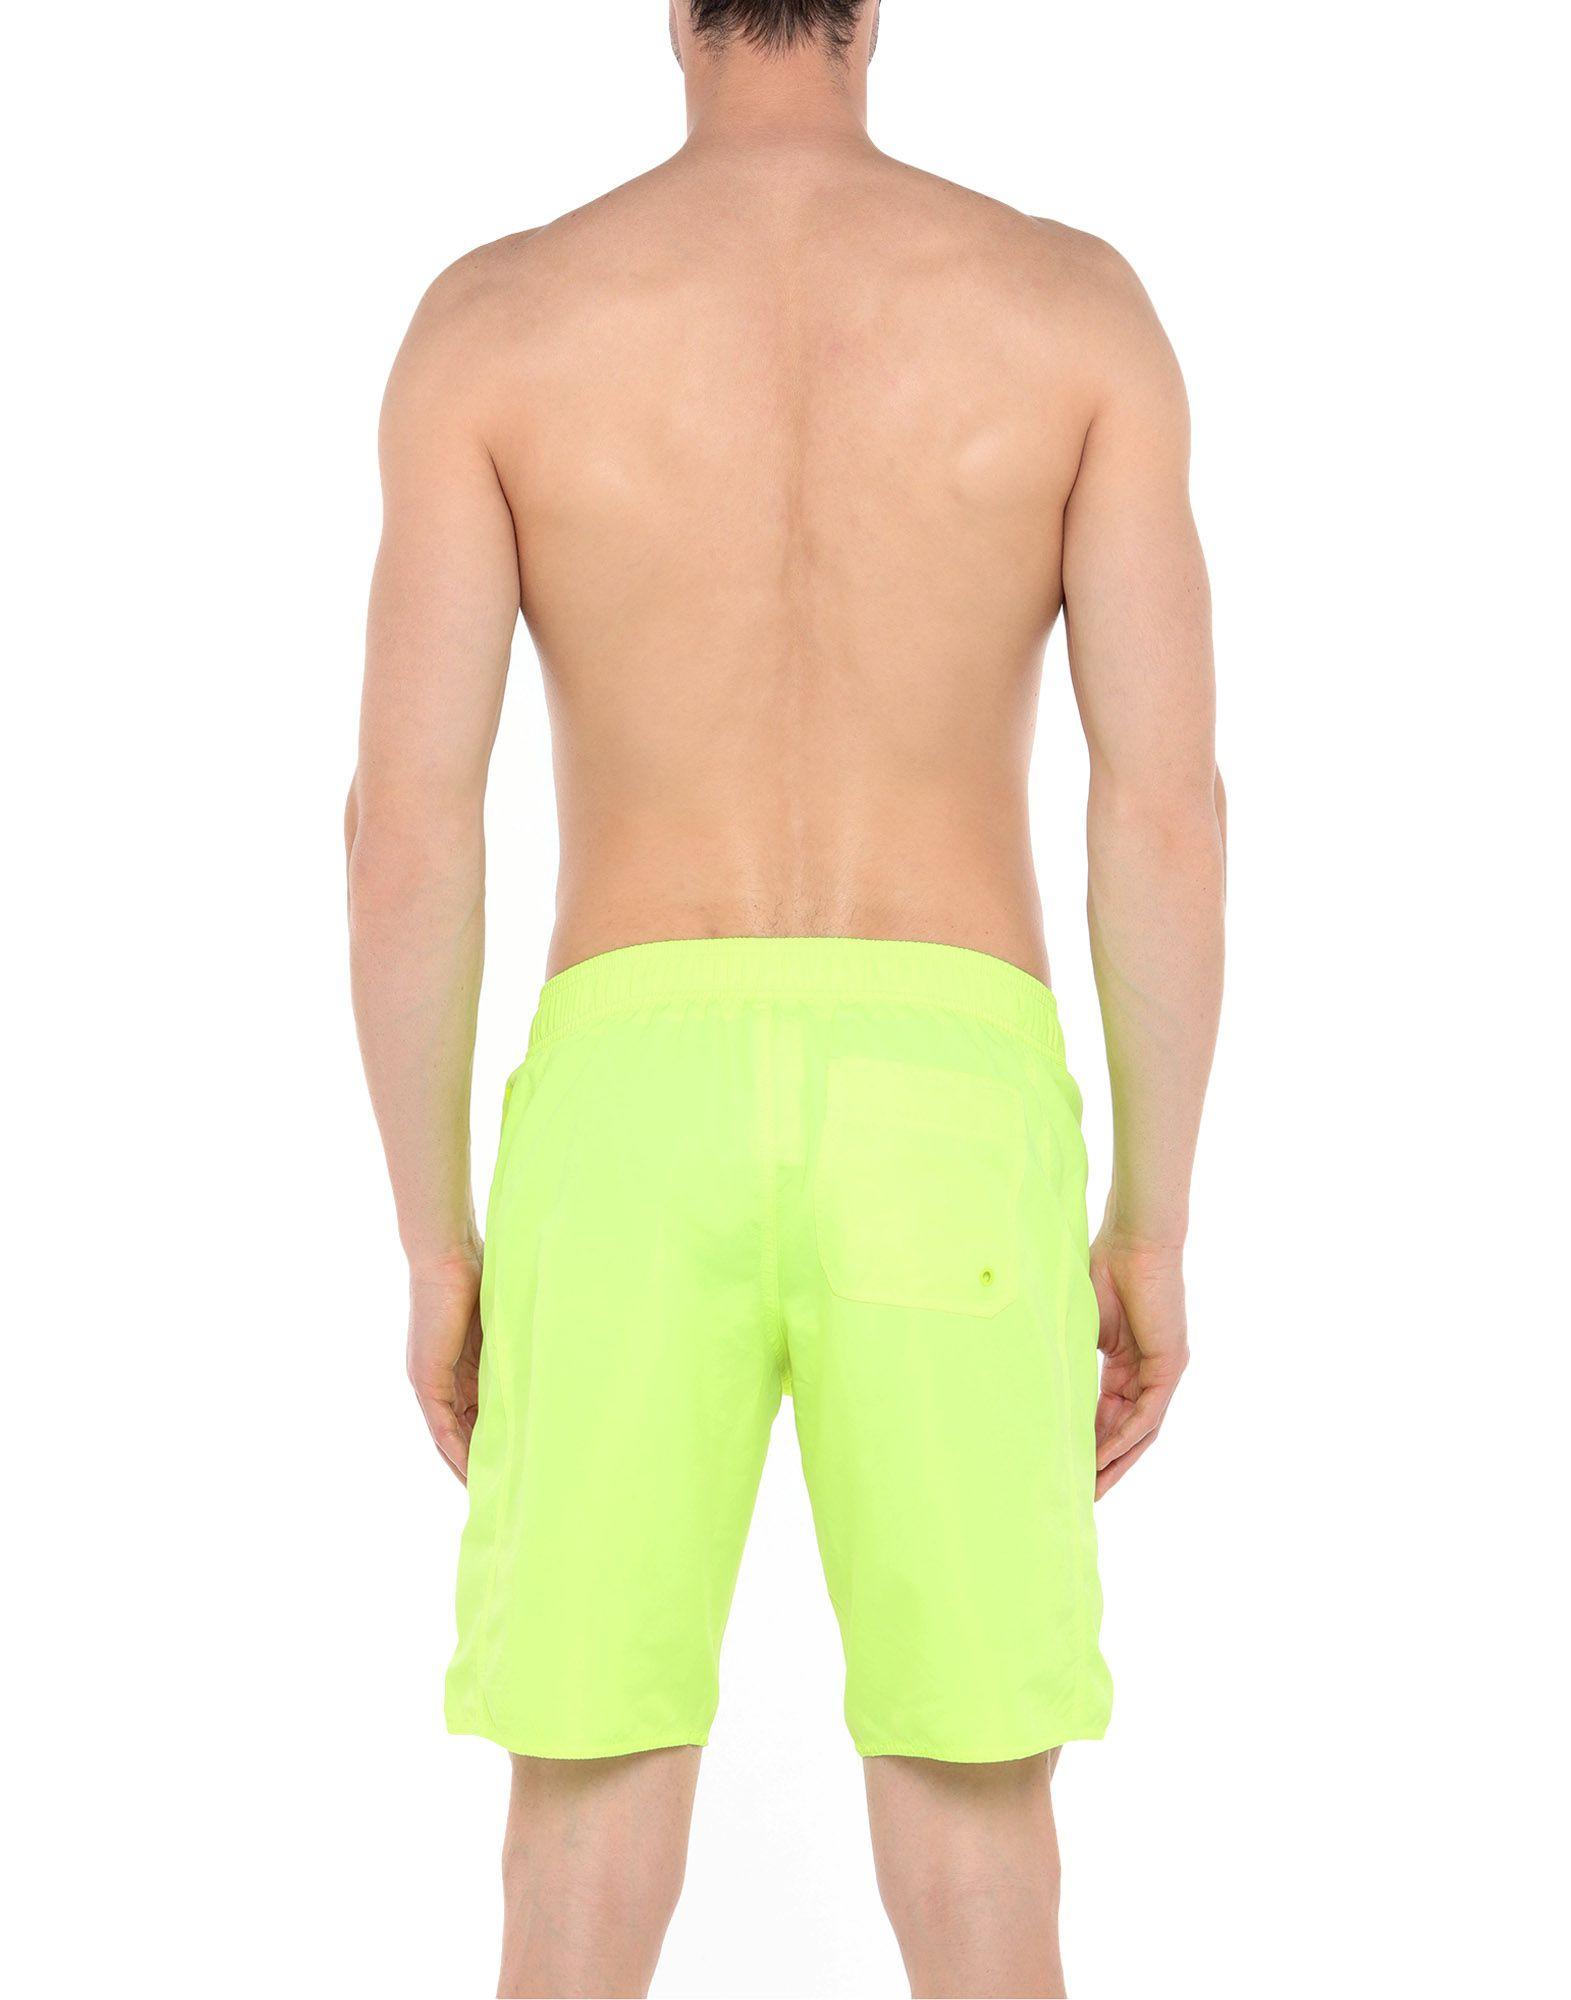 EA7 Swimming Trunks in Yellow for Men - Lyst